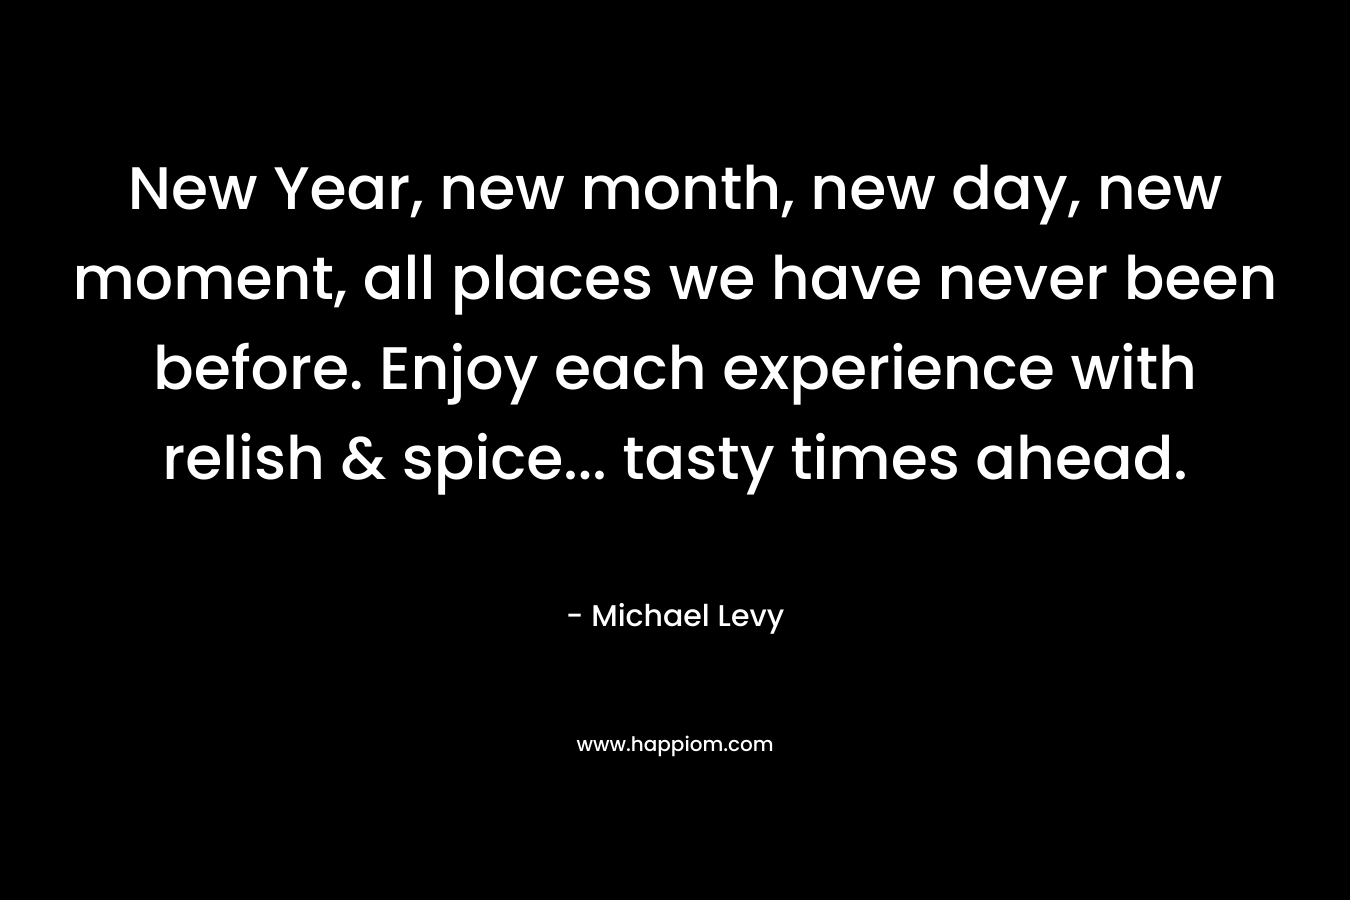 New Year, new month, new day, new moment, all places we have never been before. Enjoy each experience with relish & spice... tasty times ahead.